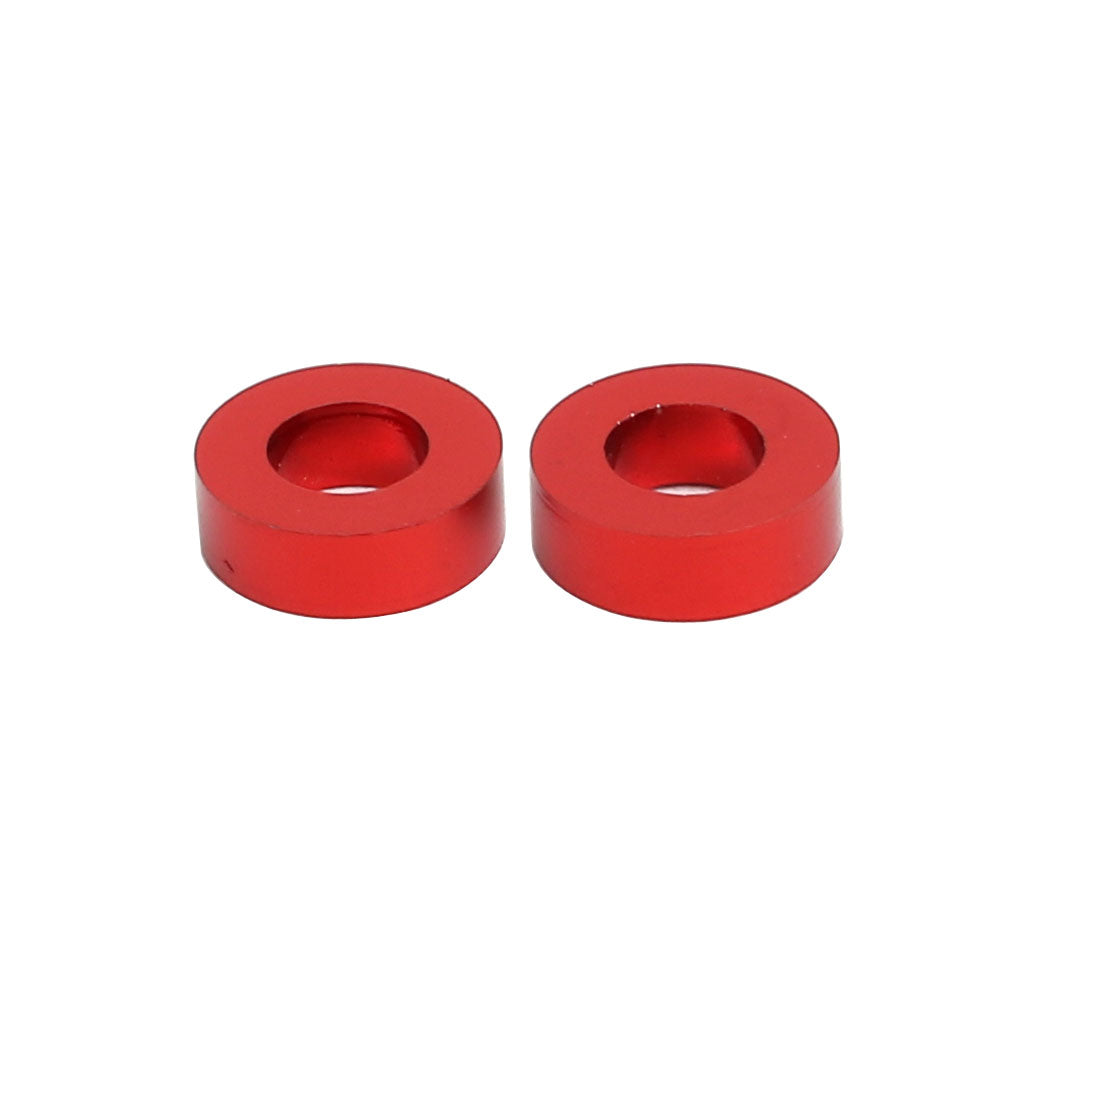 uxcell Uxcell 10pcs 2mm Thickness M3 Aluminum Alloy Flat  Screw Washer Red